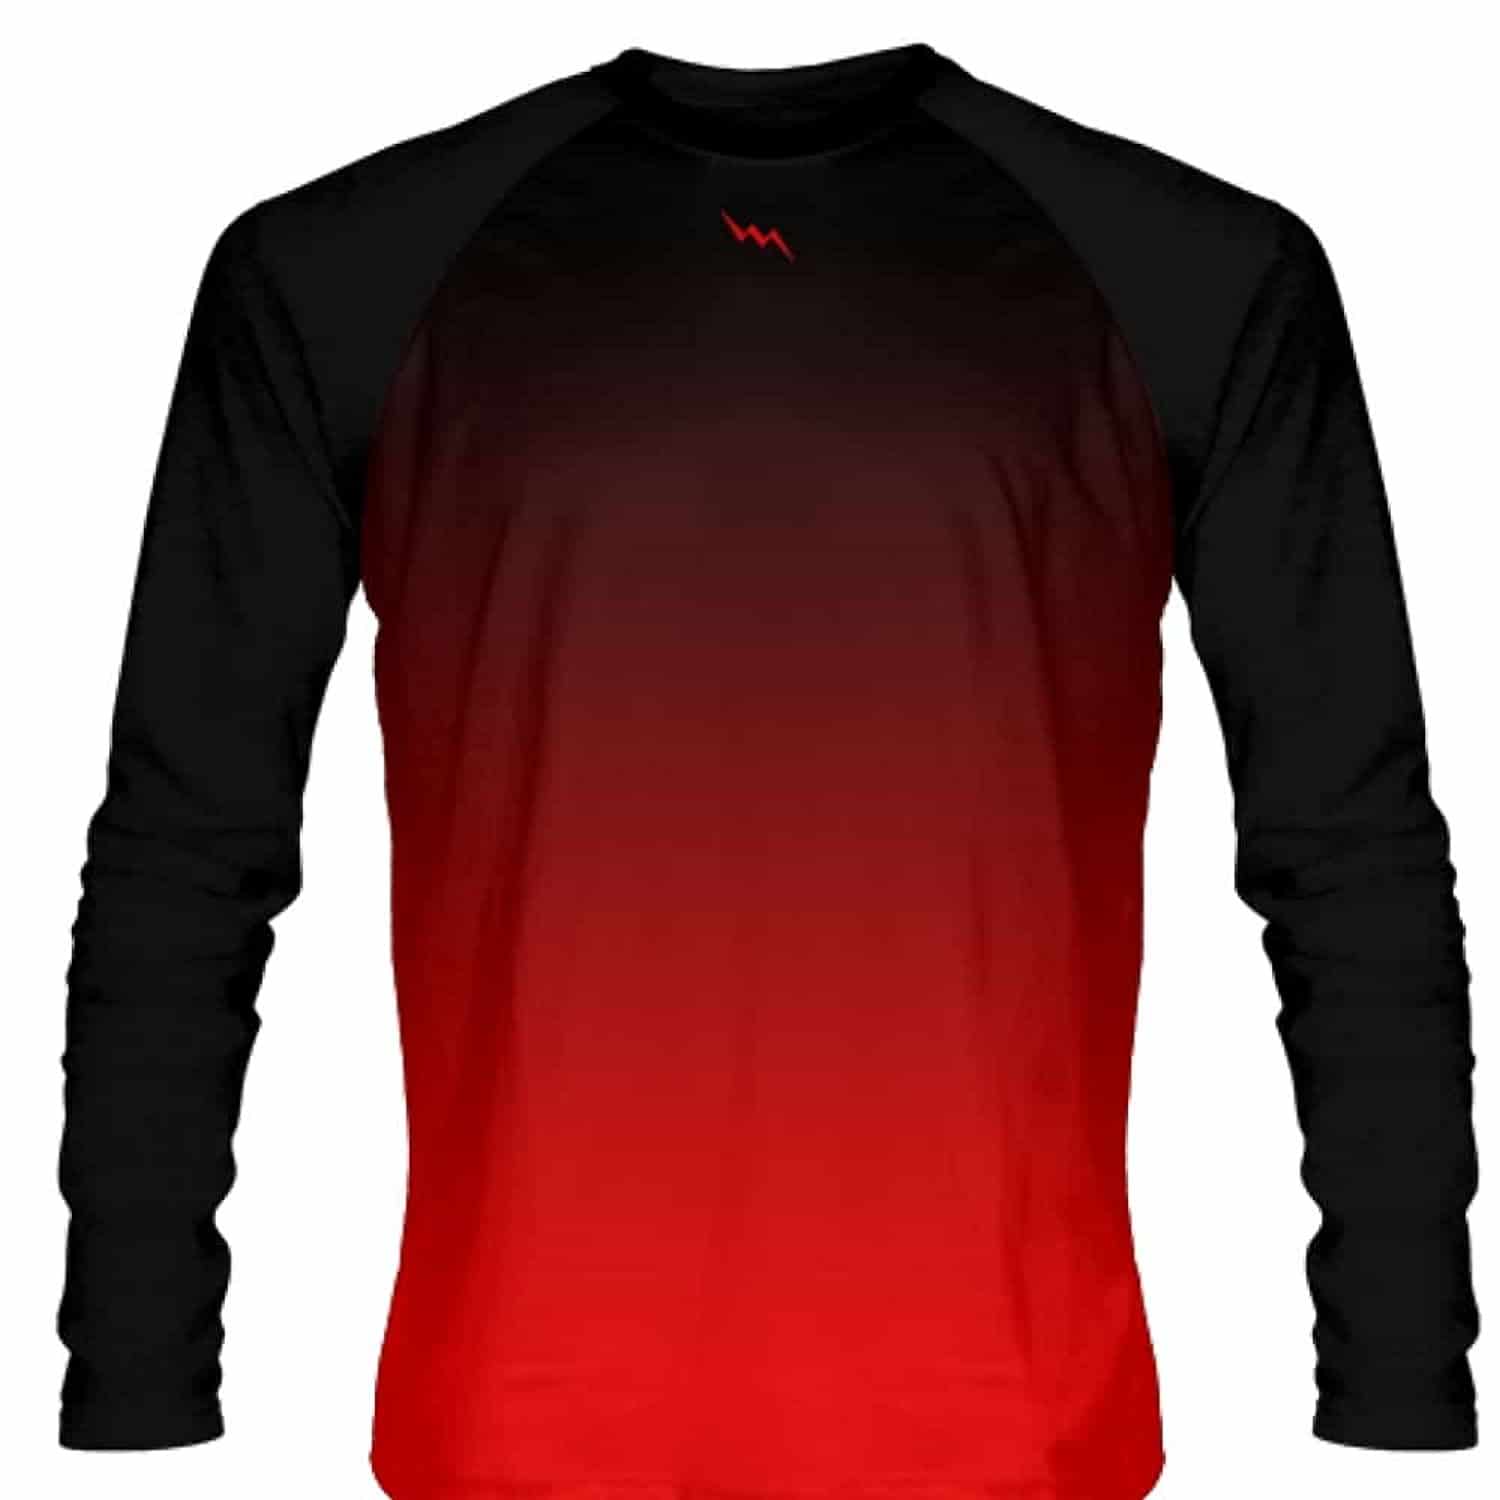 red and black jersey shirt